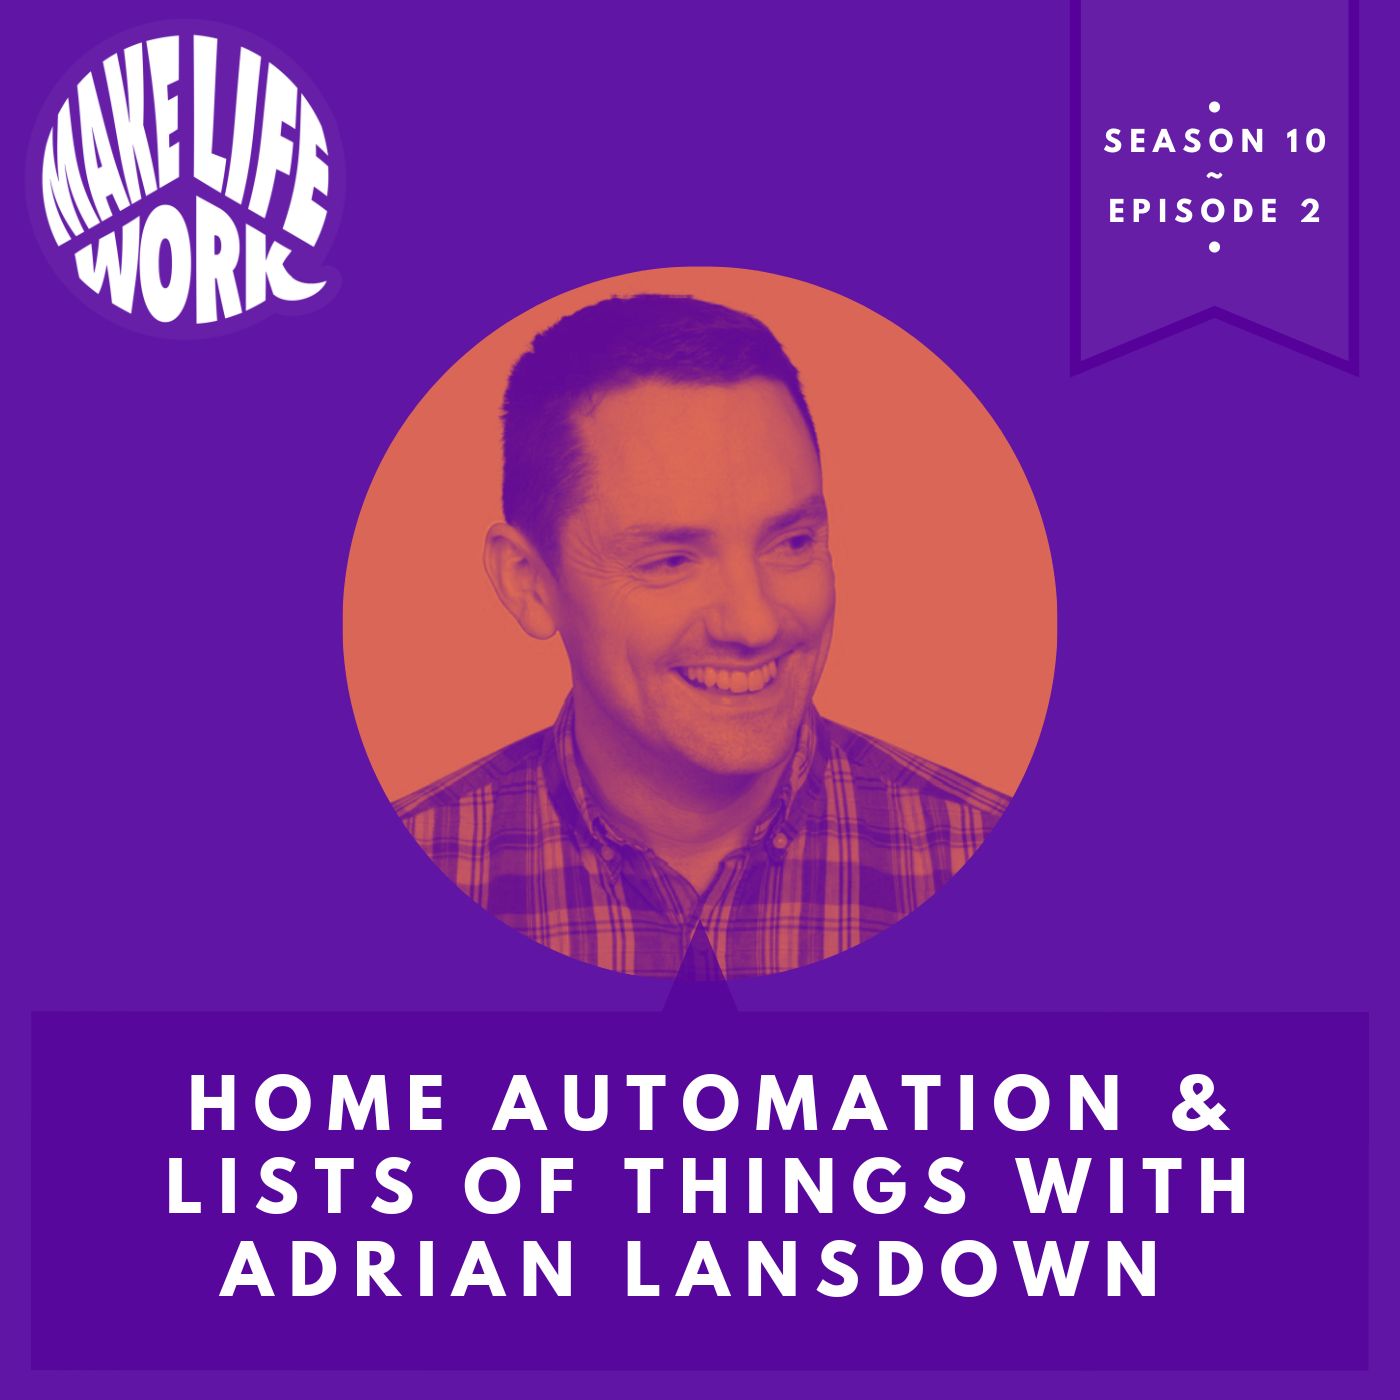 Home automation & lists of things with Adrian Lansdown